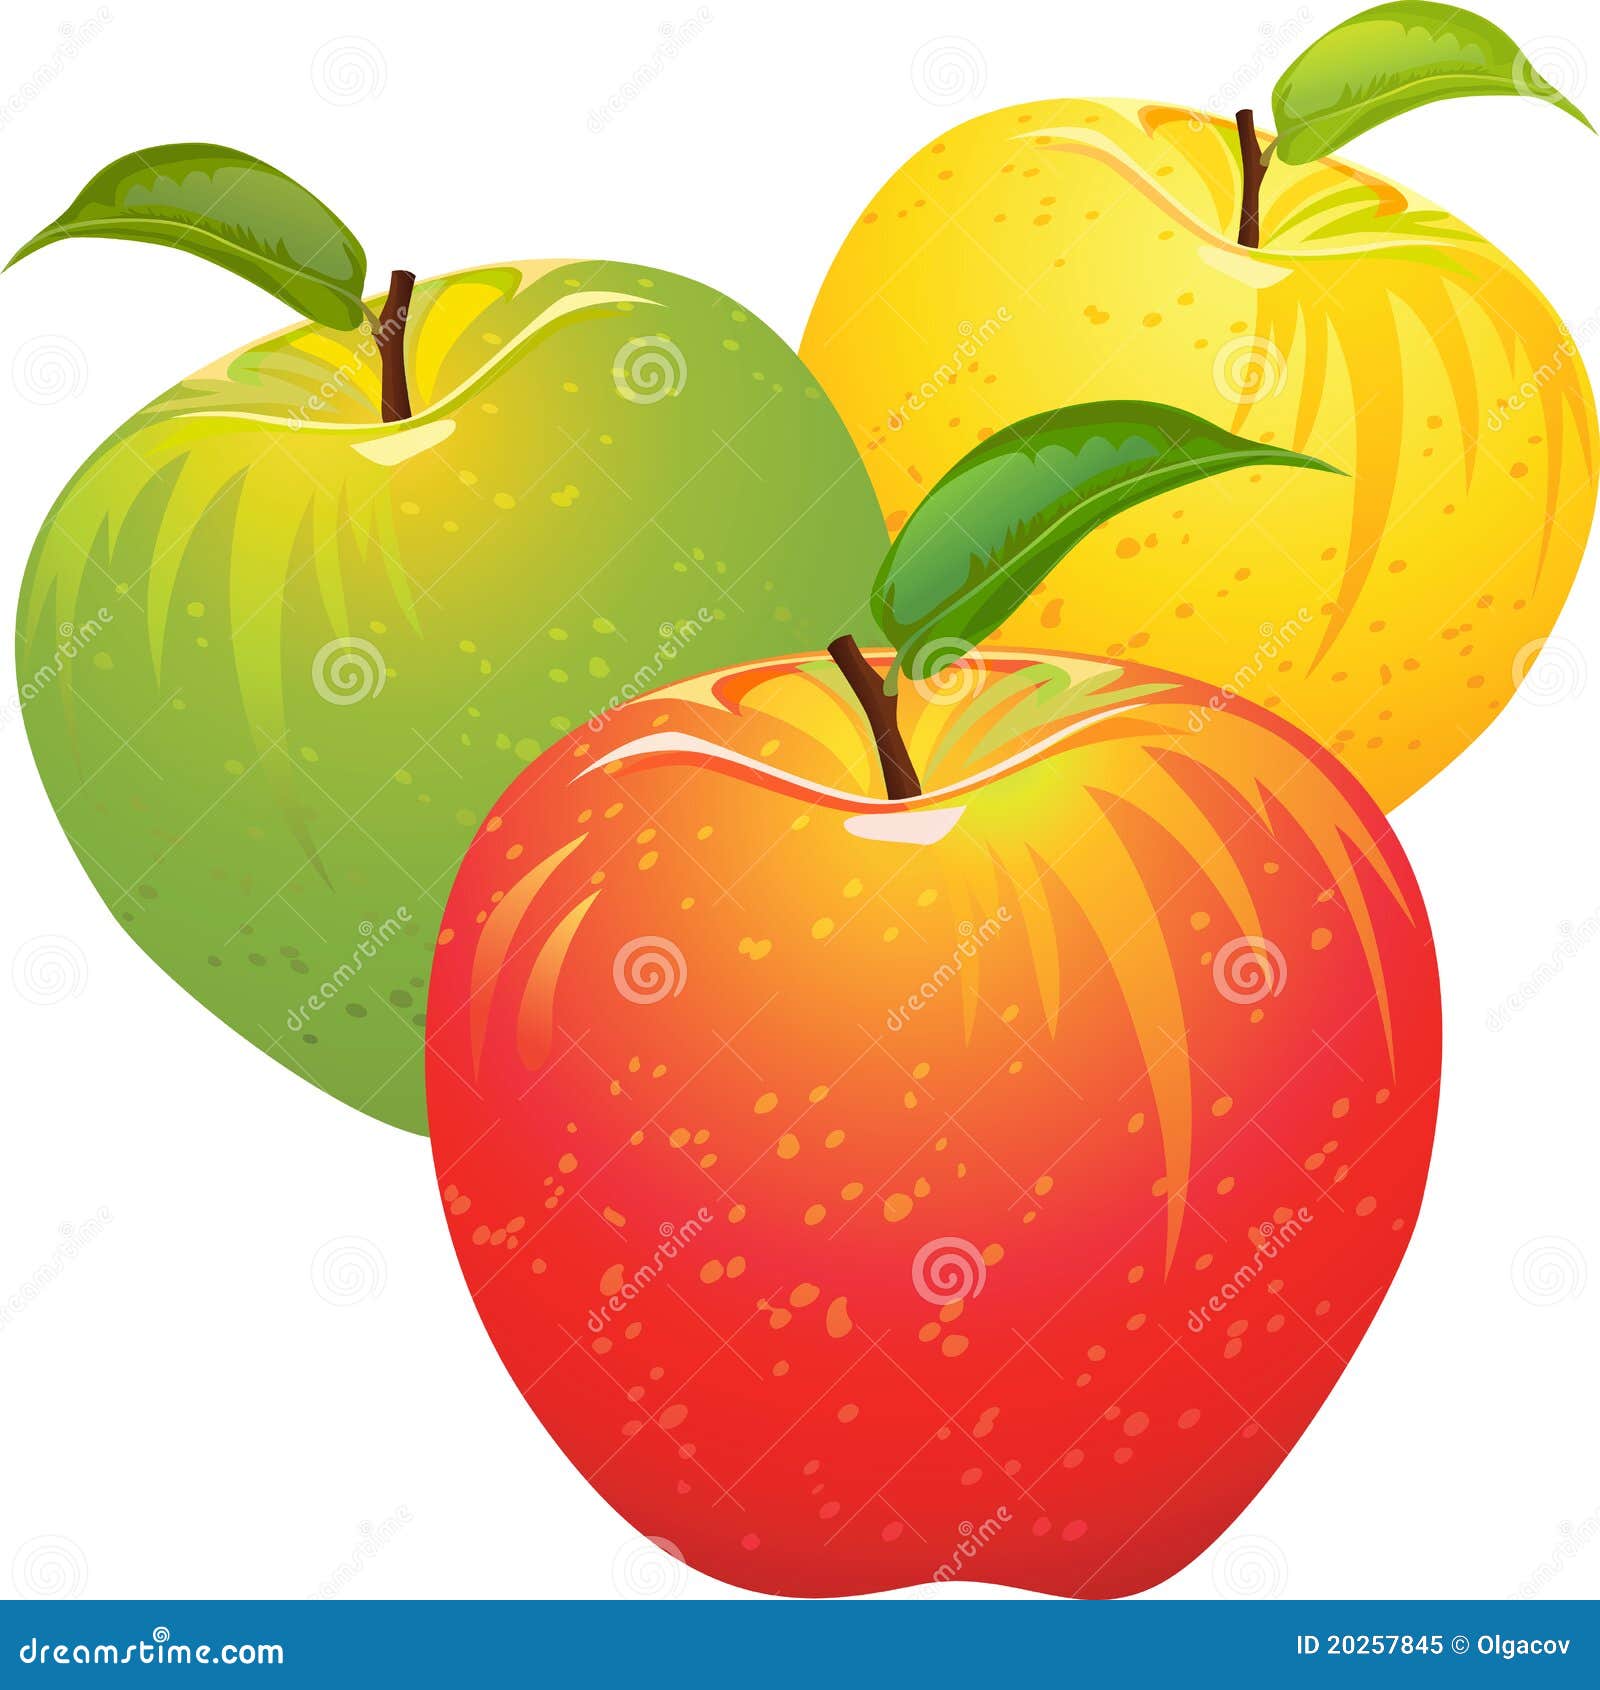  set of colorful apples